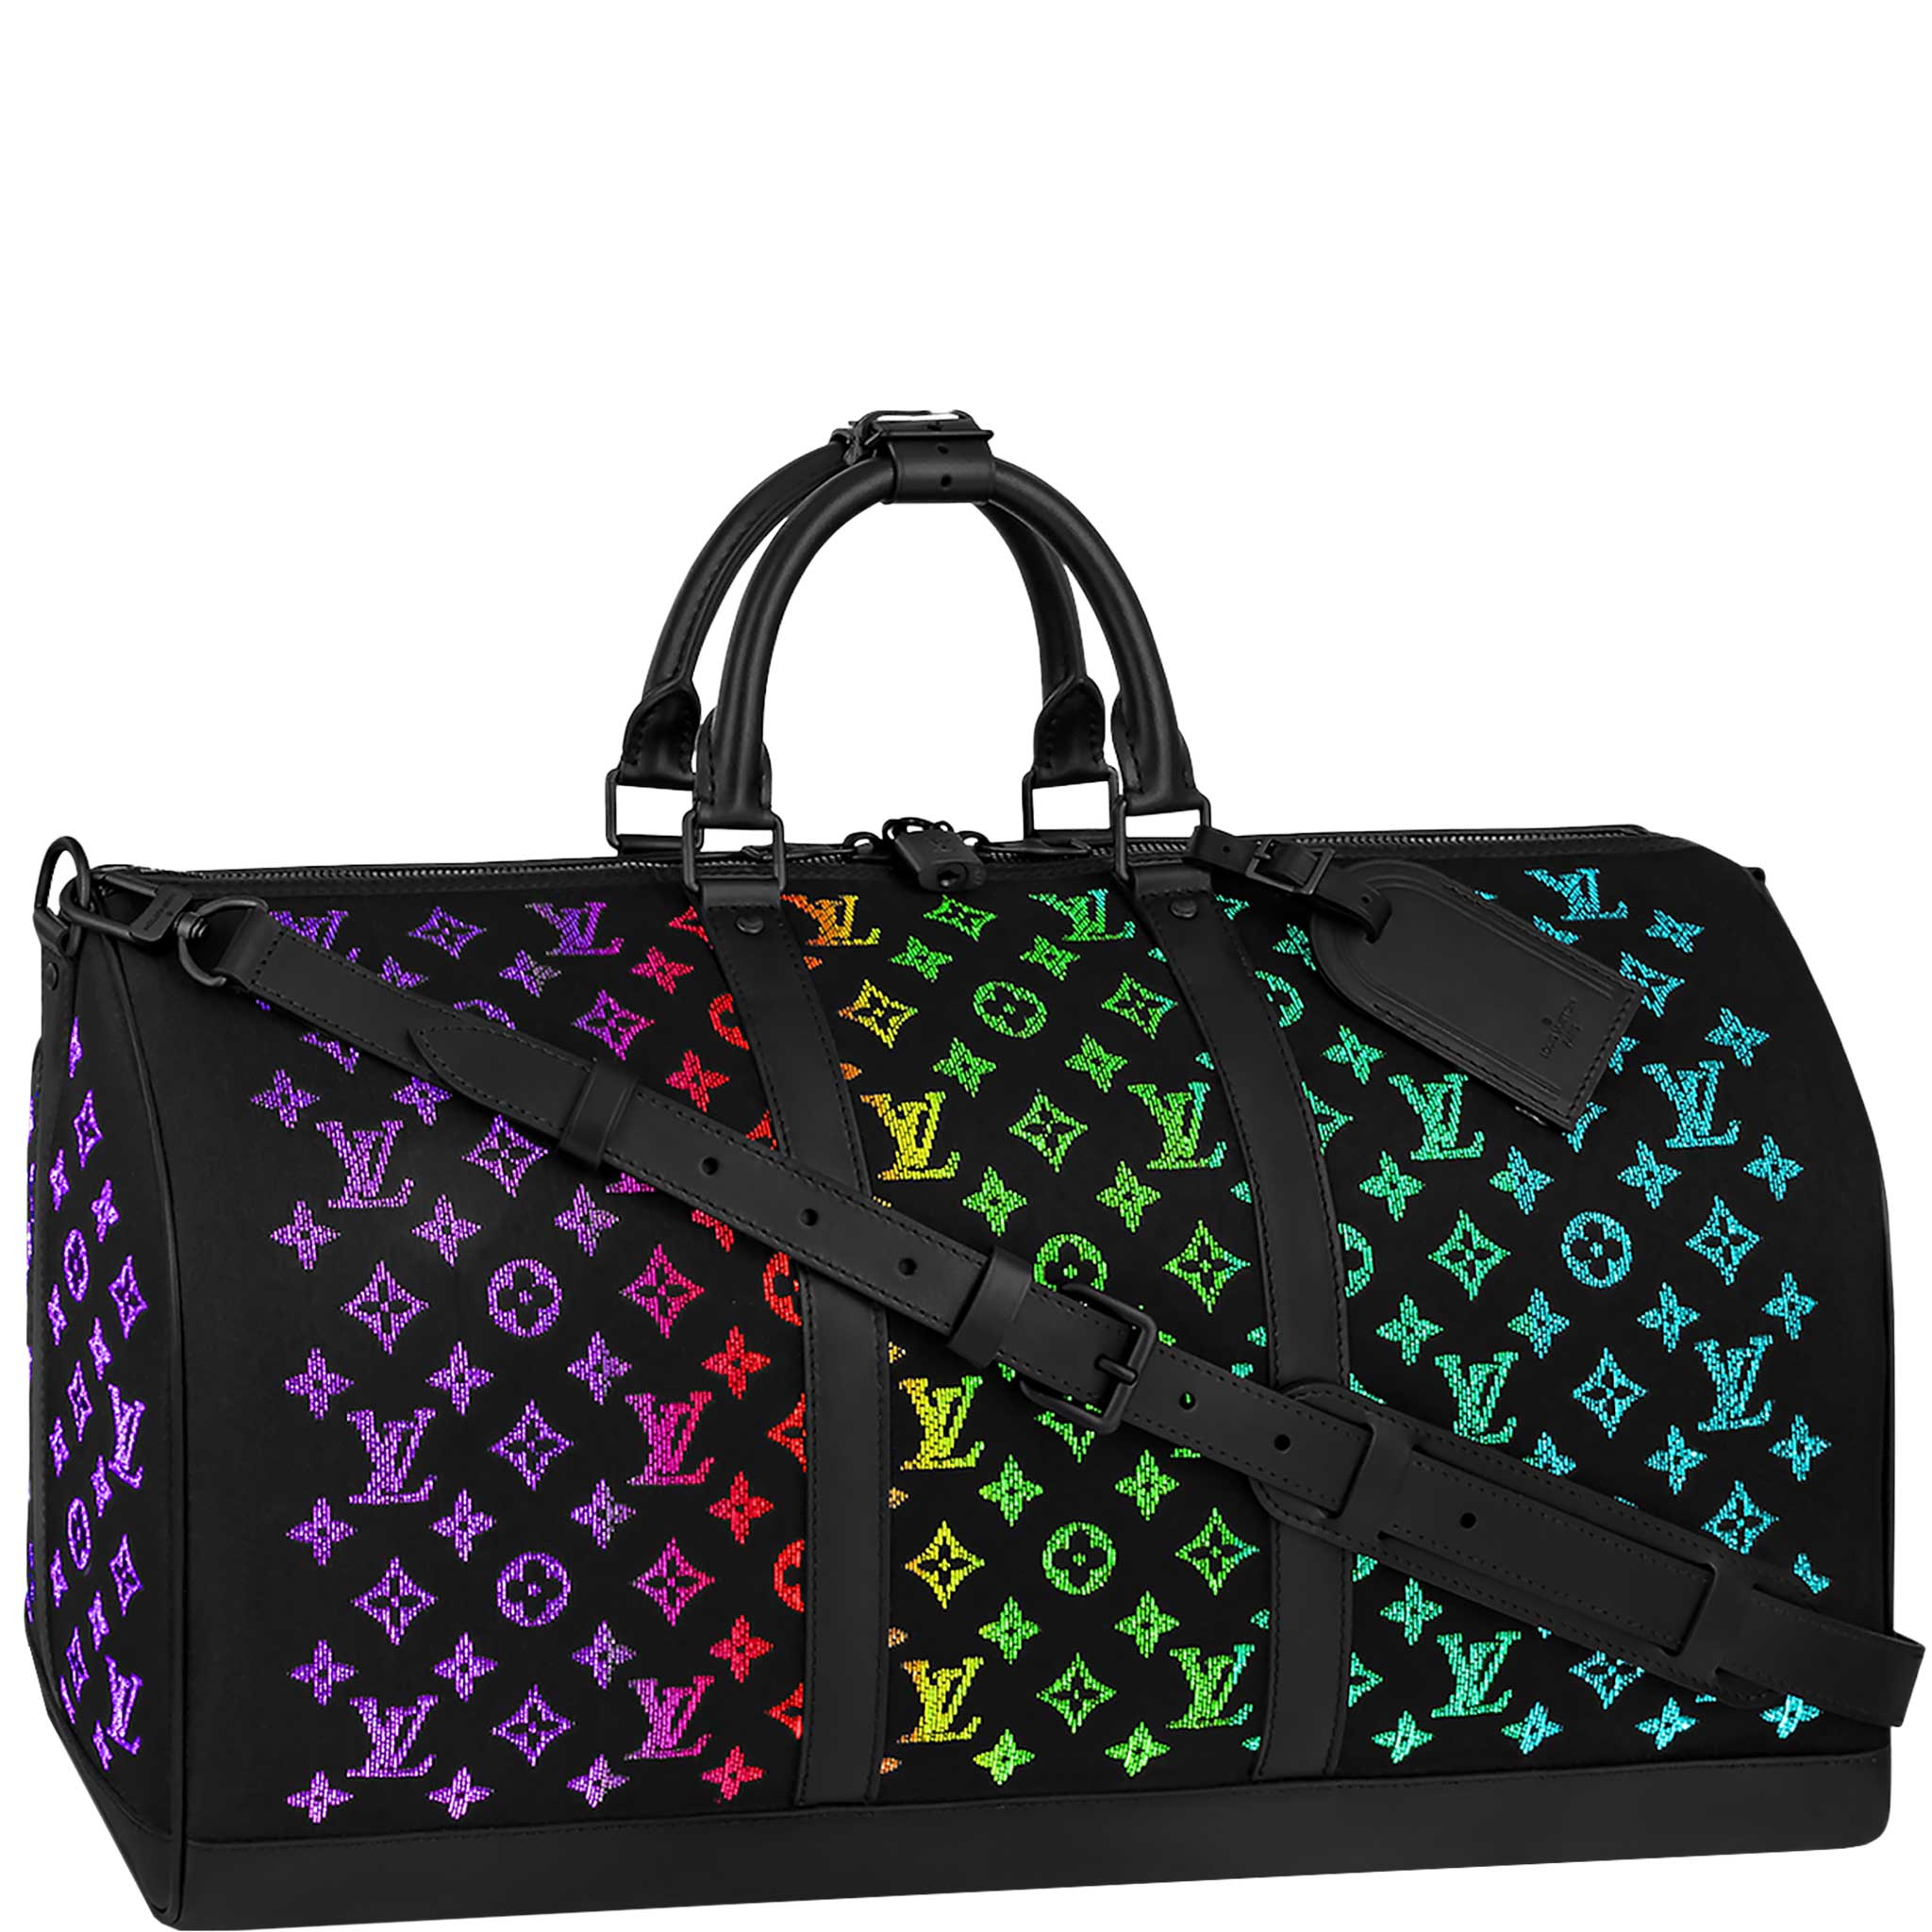 Louis Vuitton keepall light up LED Monogram bag, By Fashion point